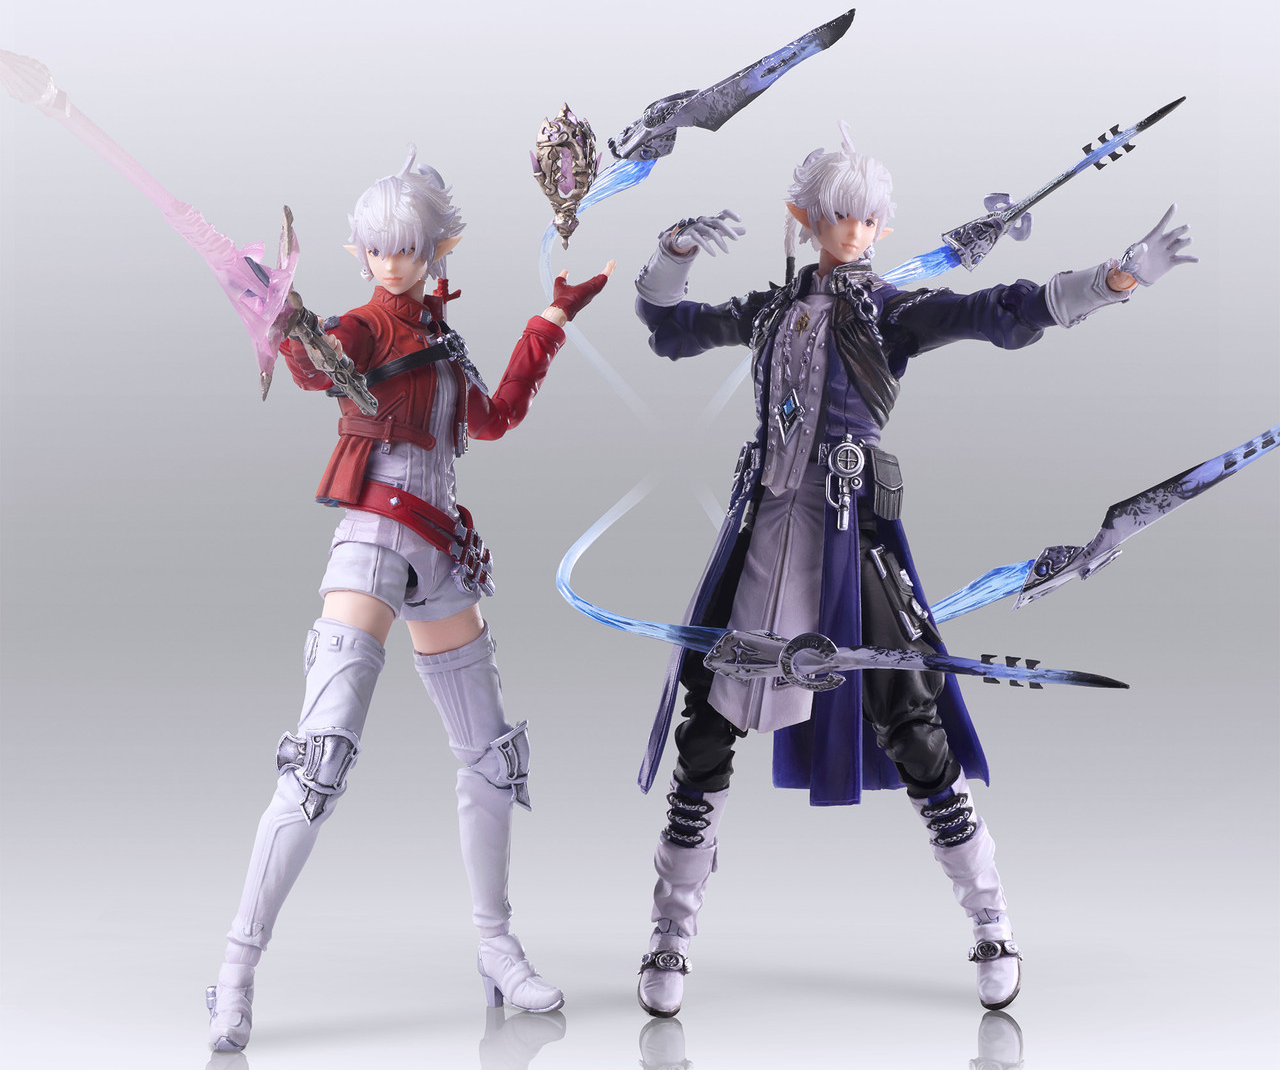 Final Fantasy XIV Alphinaud & Alisaie Bring Arts Figures Announced for Pre-Order